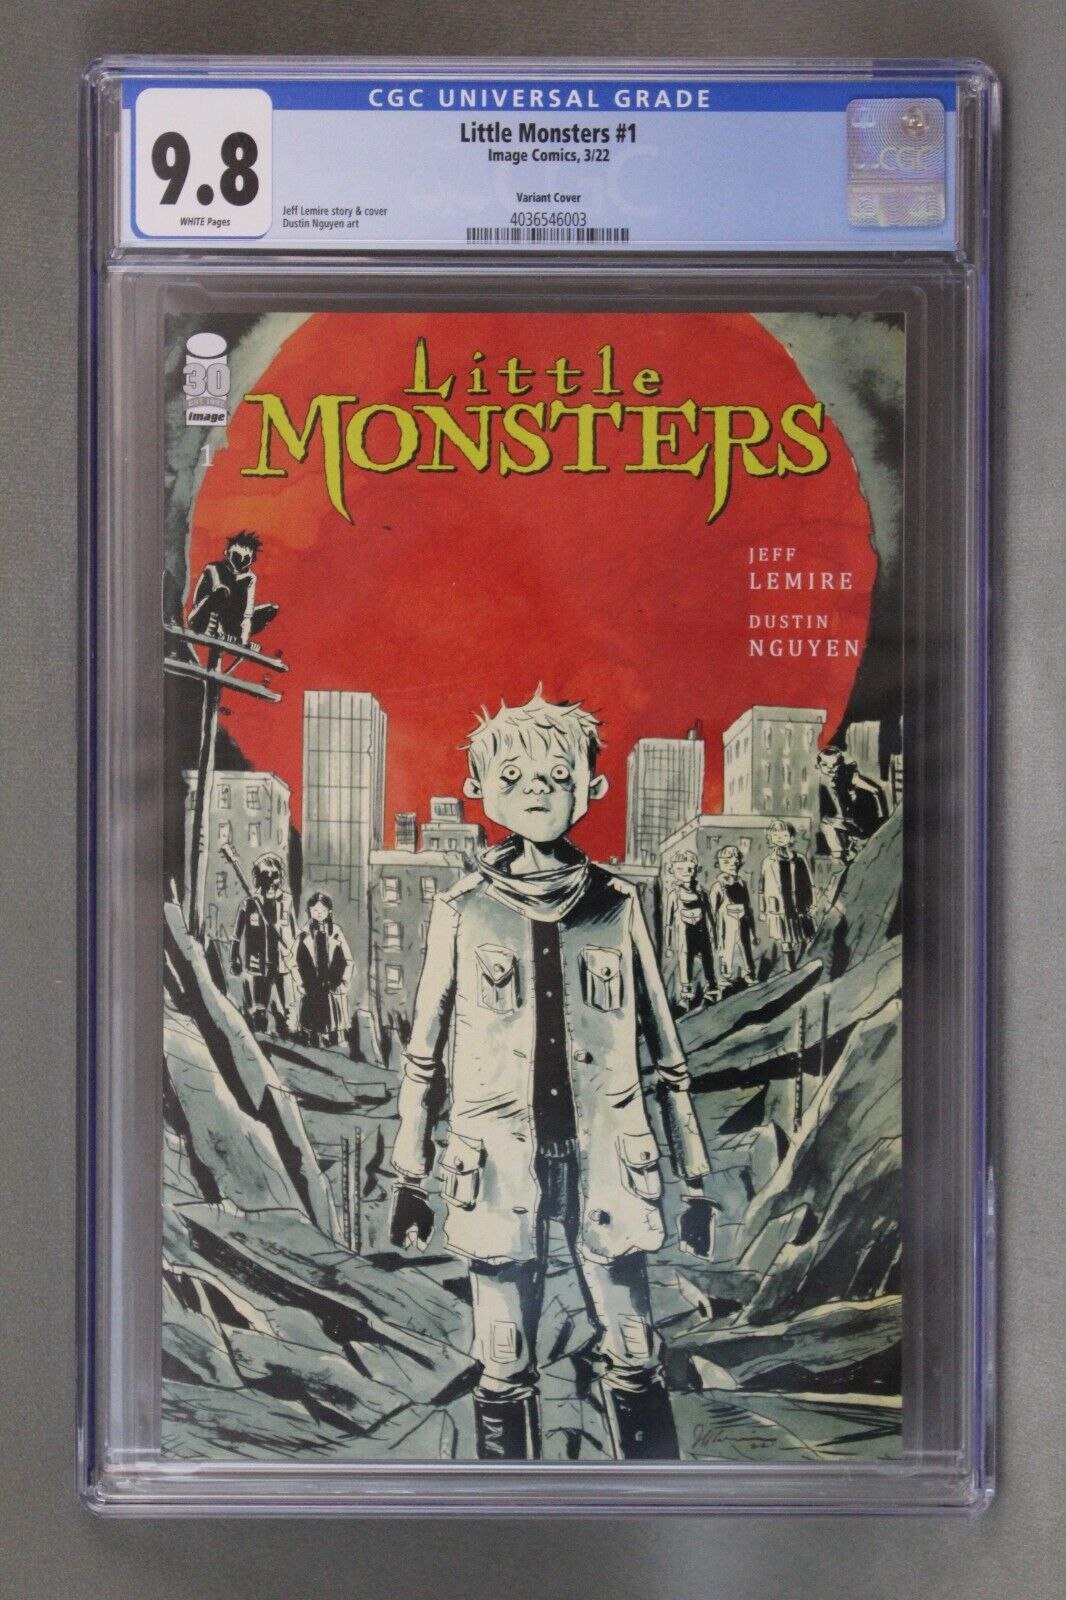 LITTLE MONSTERS #1, 3/22, CGC UNIVERSAL GRADE 9.8, White Pages, Variant Cover